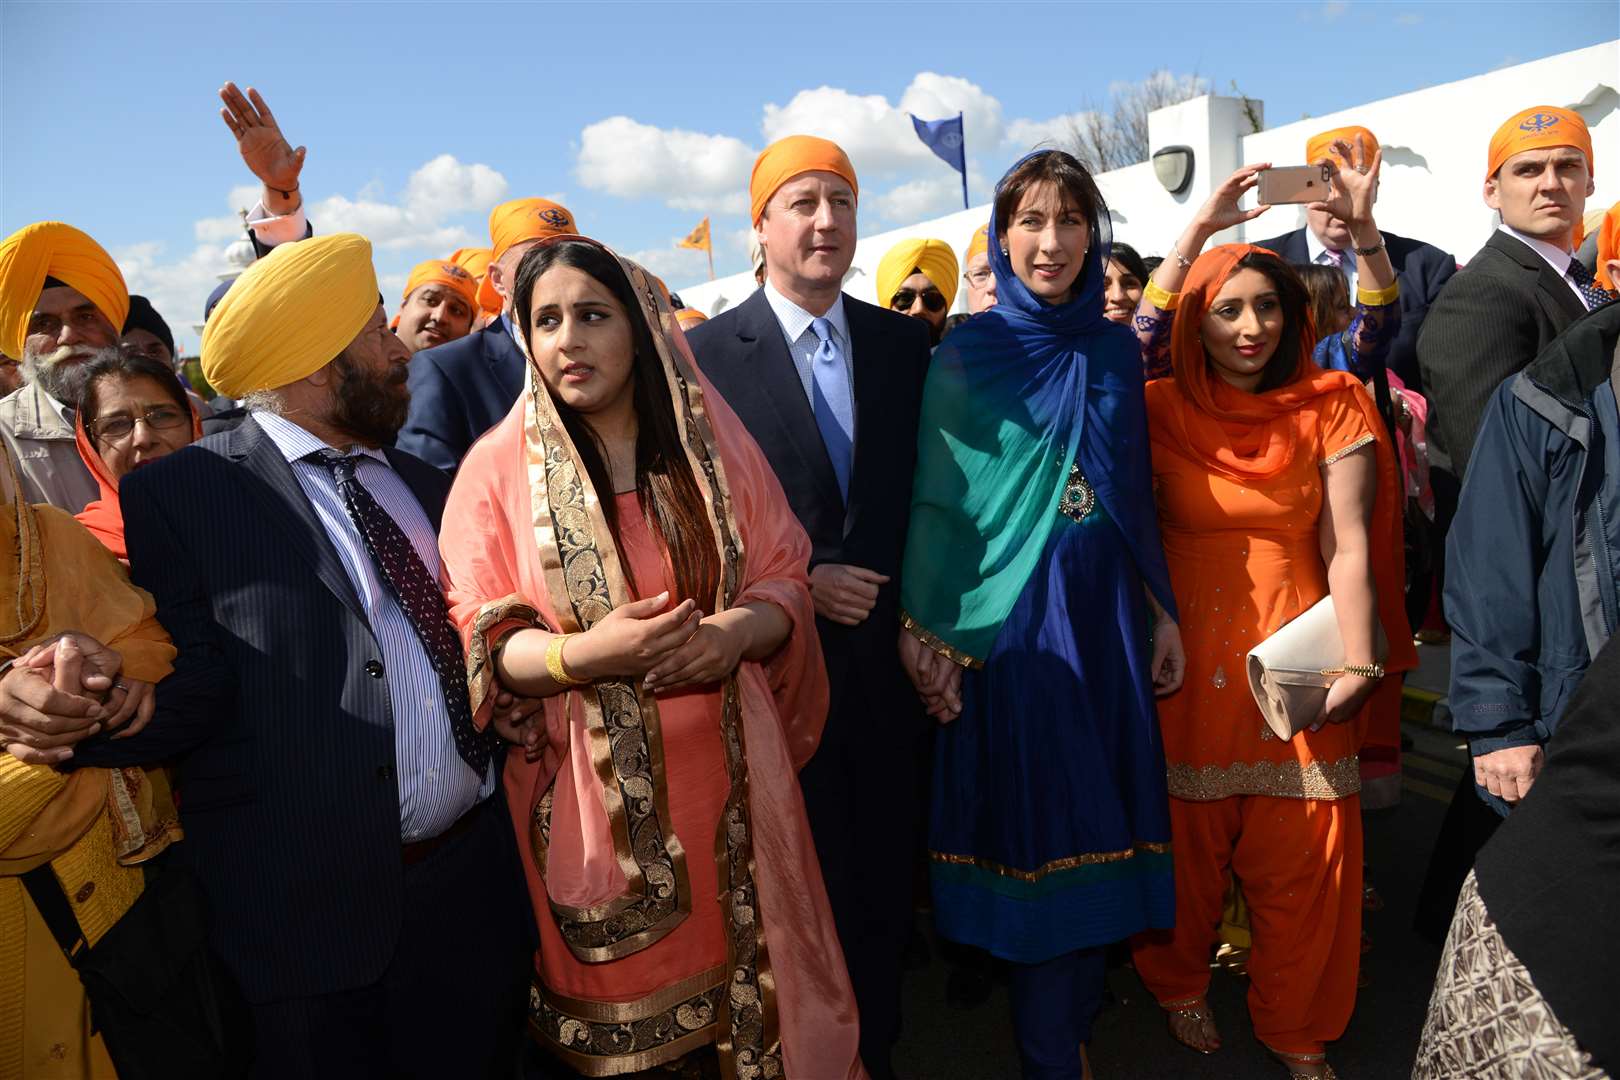 David and Samantha Cameron attended last year's celebrations.